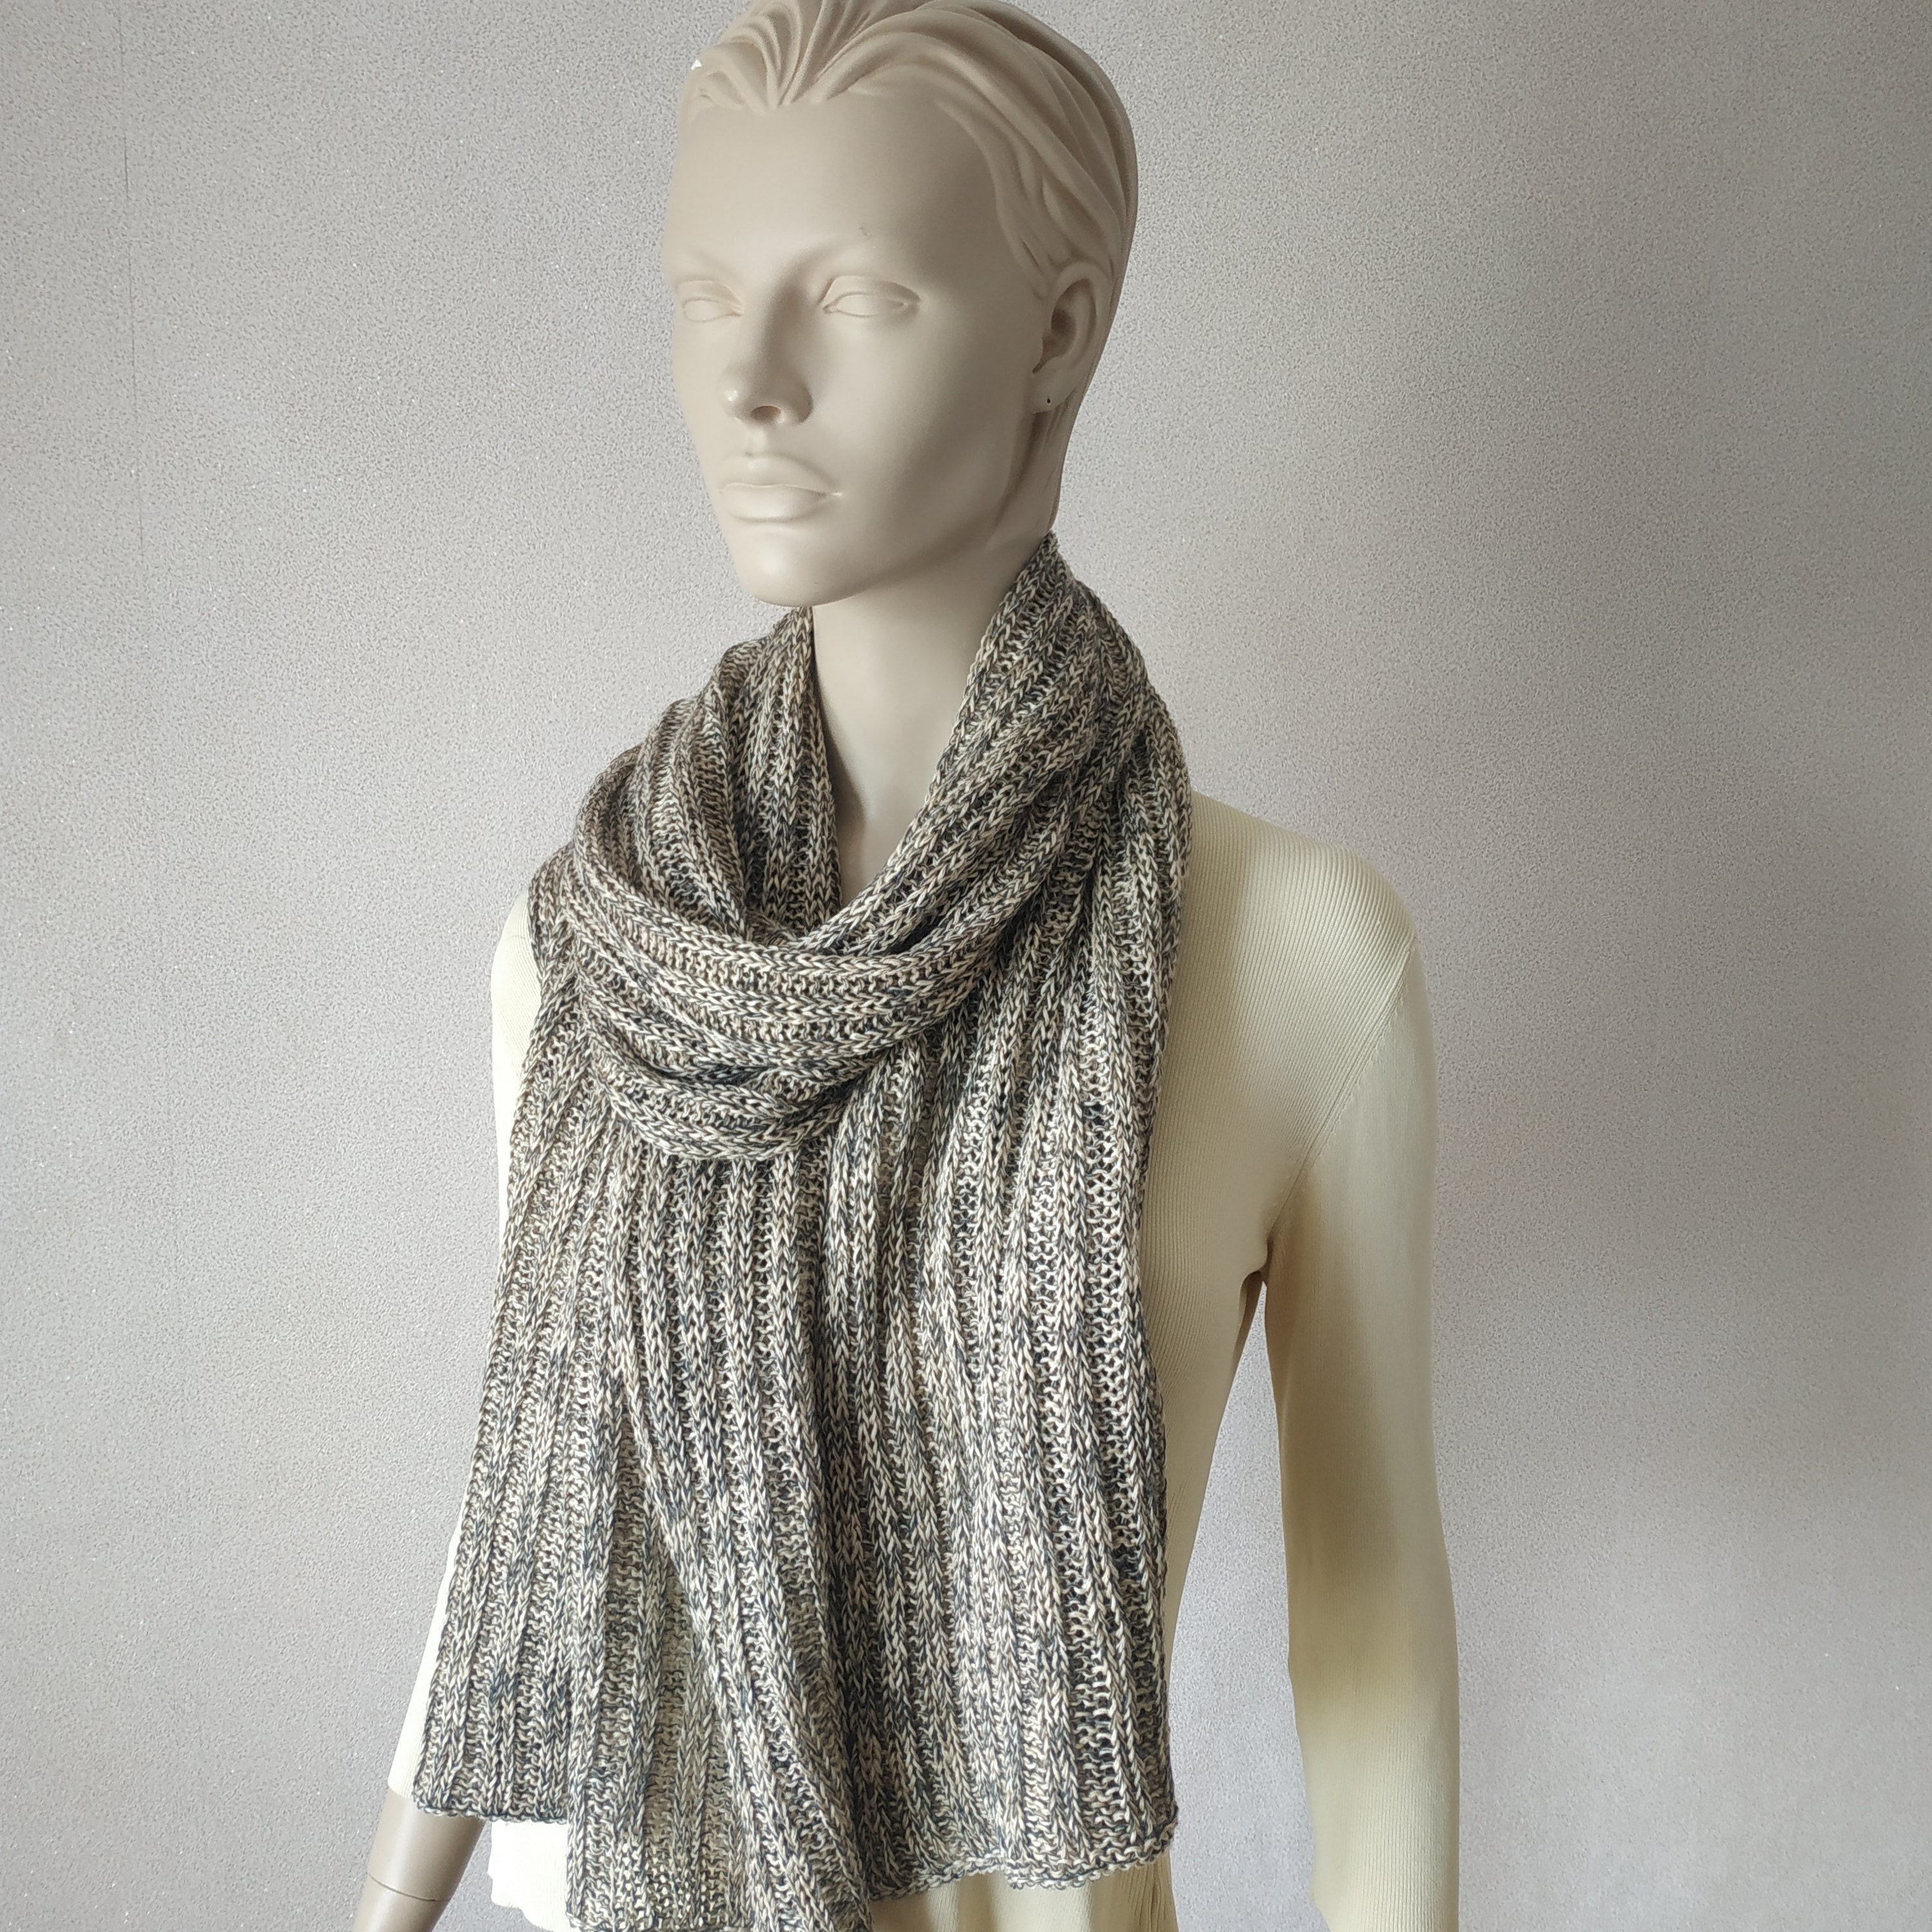 Organic linen unisex blanket scarf Knit comfy casual travel shawl wrap Natural linen accessories